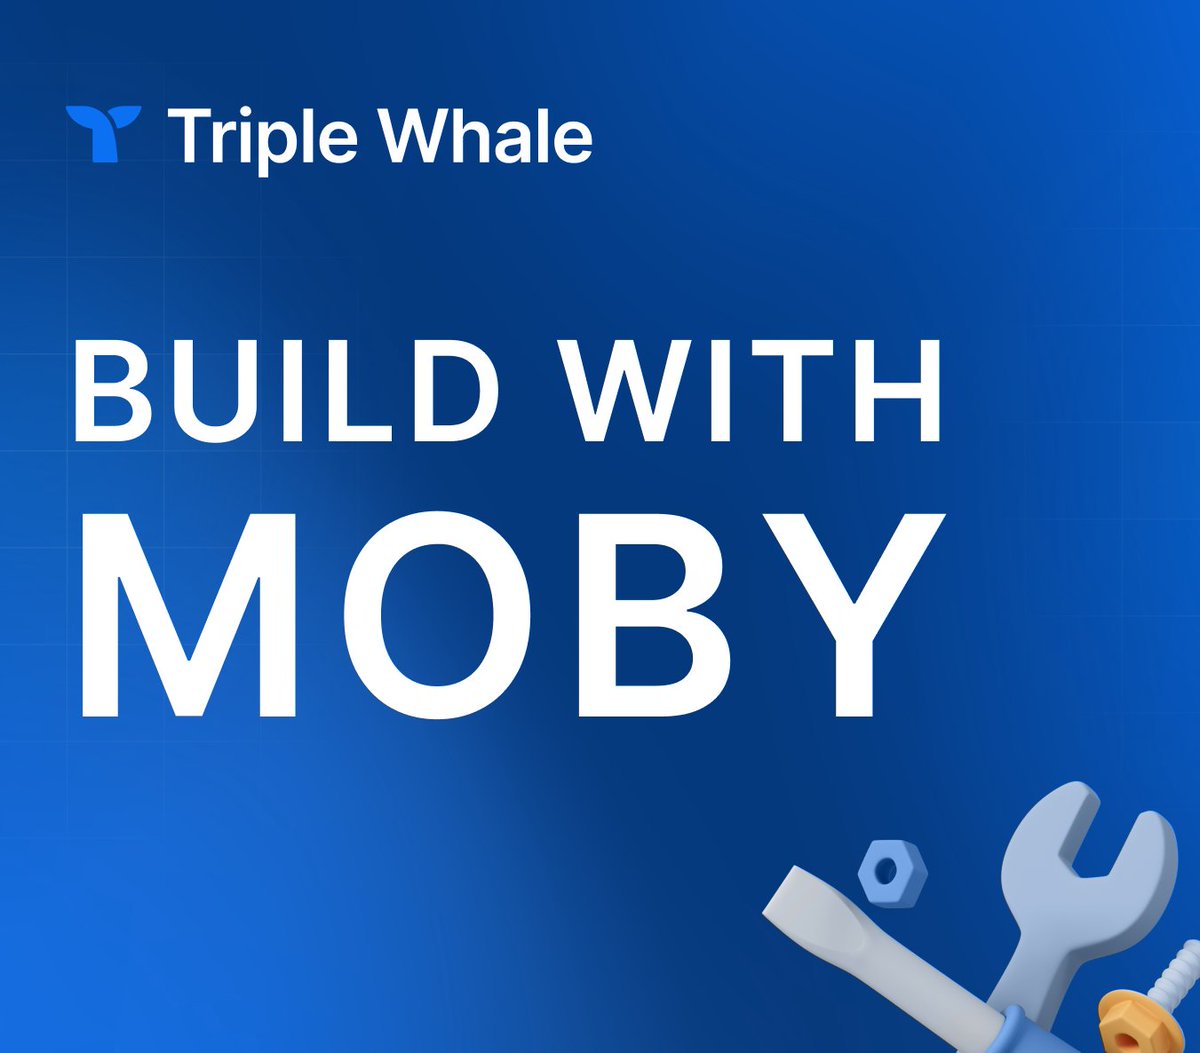 We’re going LIVE today at 2:30PM EST here on 𝕏 for Episode 1 of Building with Moby—the weekly livestream where @Aj and the team solve real business problems with the next generation of Triple Whale. Tune in to see the future of data analysis, LIVE.